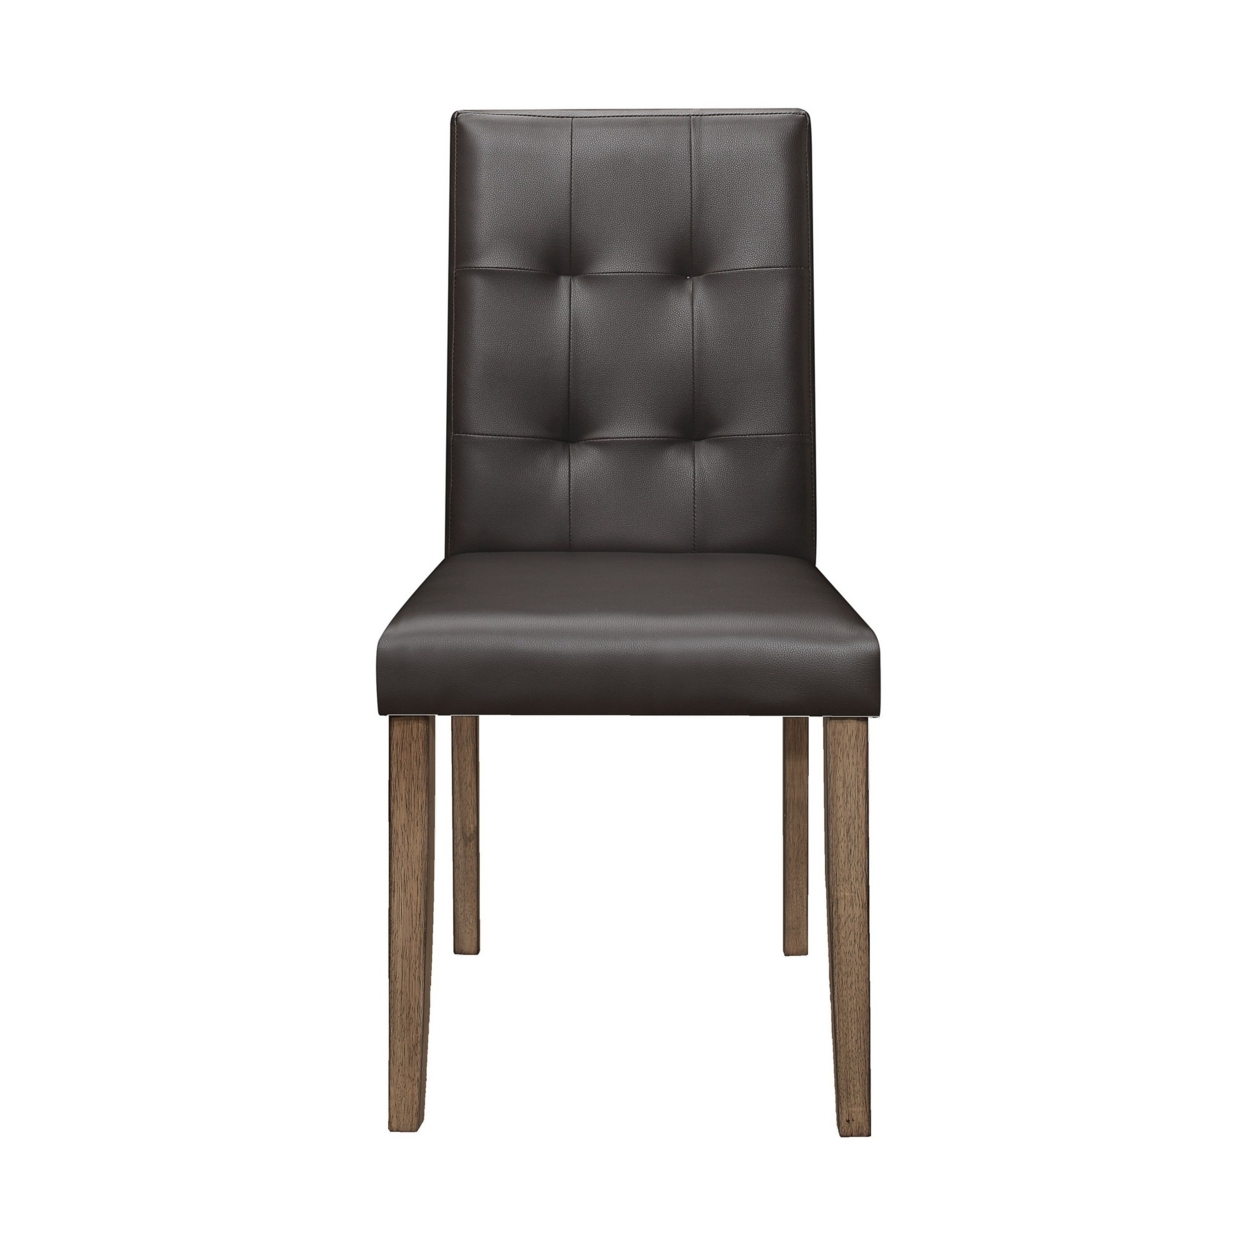 Leatherette Side Chair With Tufted Backrest, Set Of 2, Espresso Brown- Saltoro Sherpi